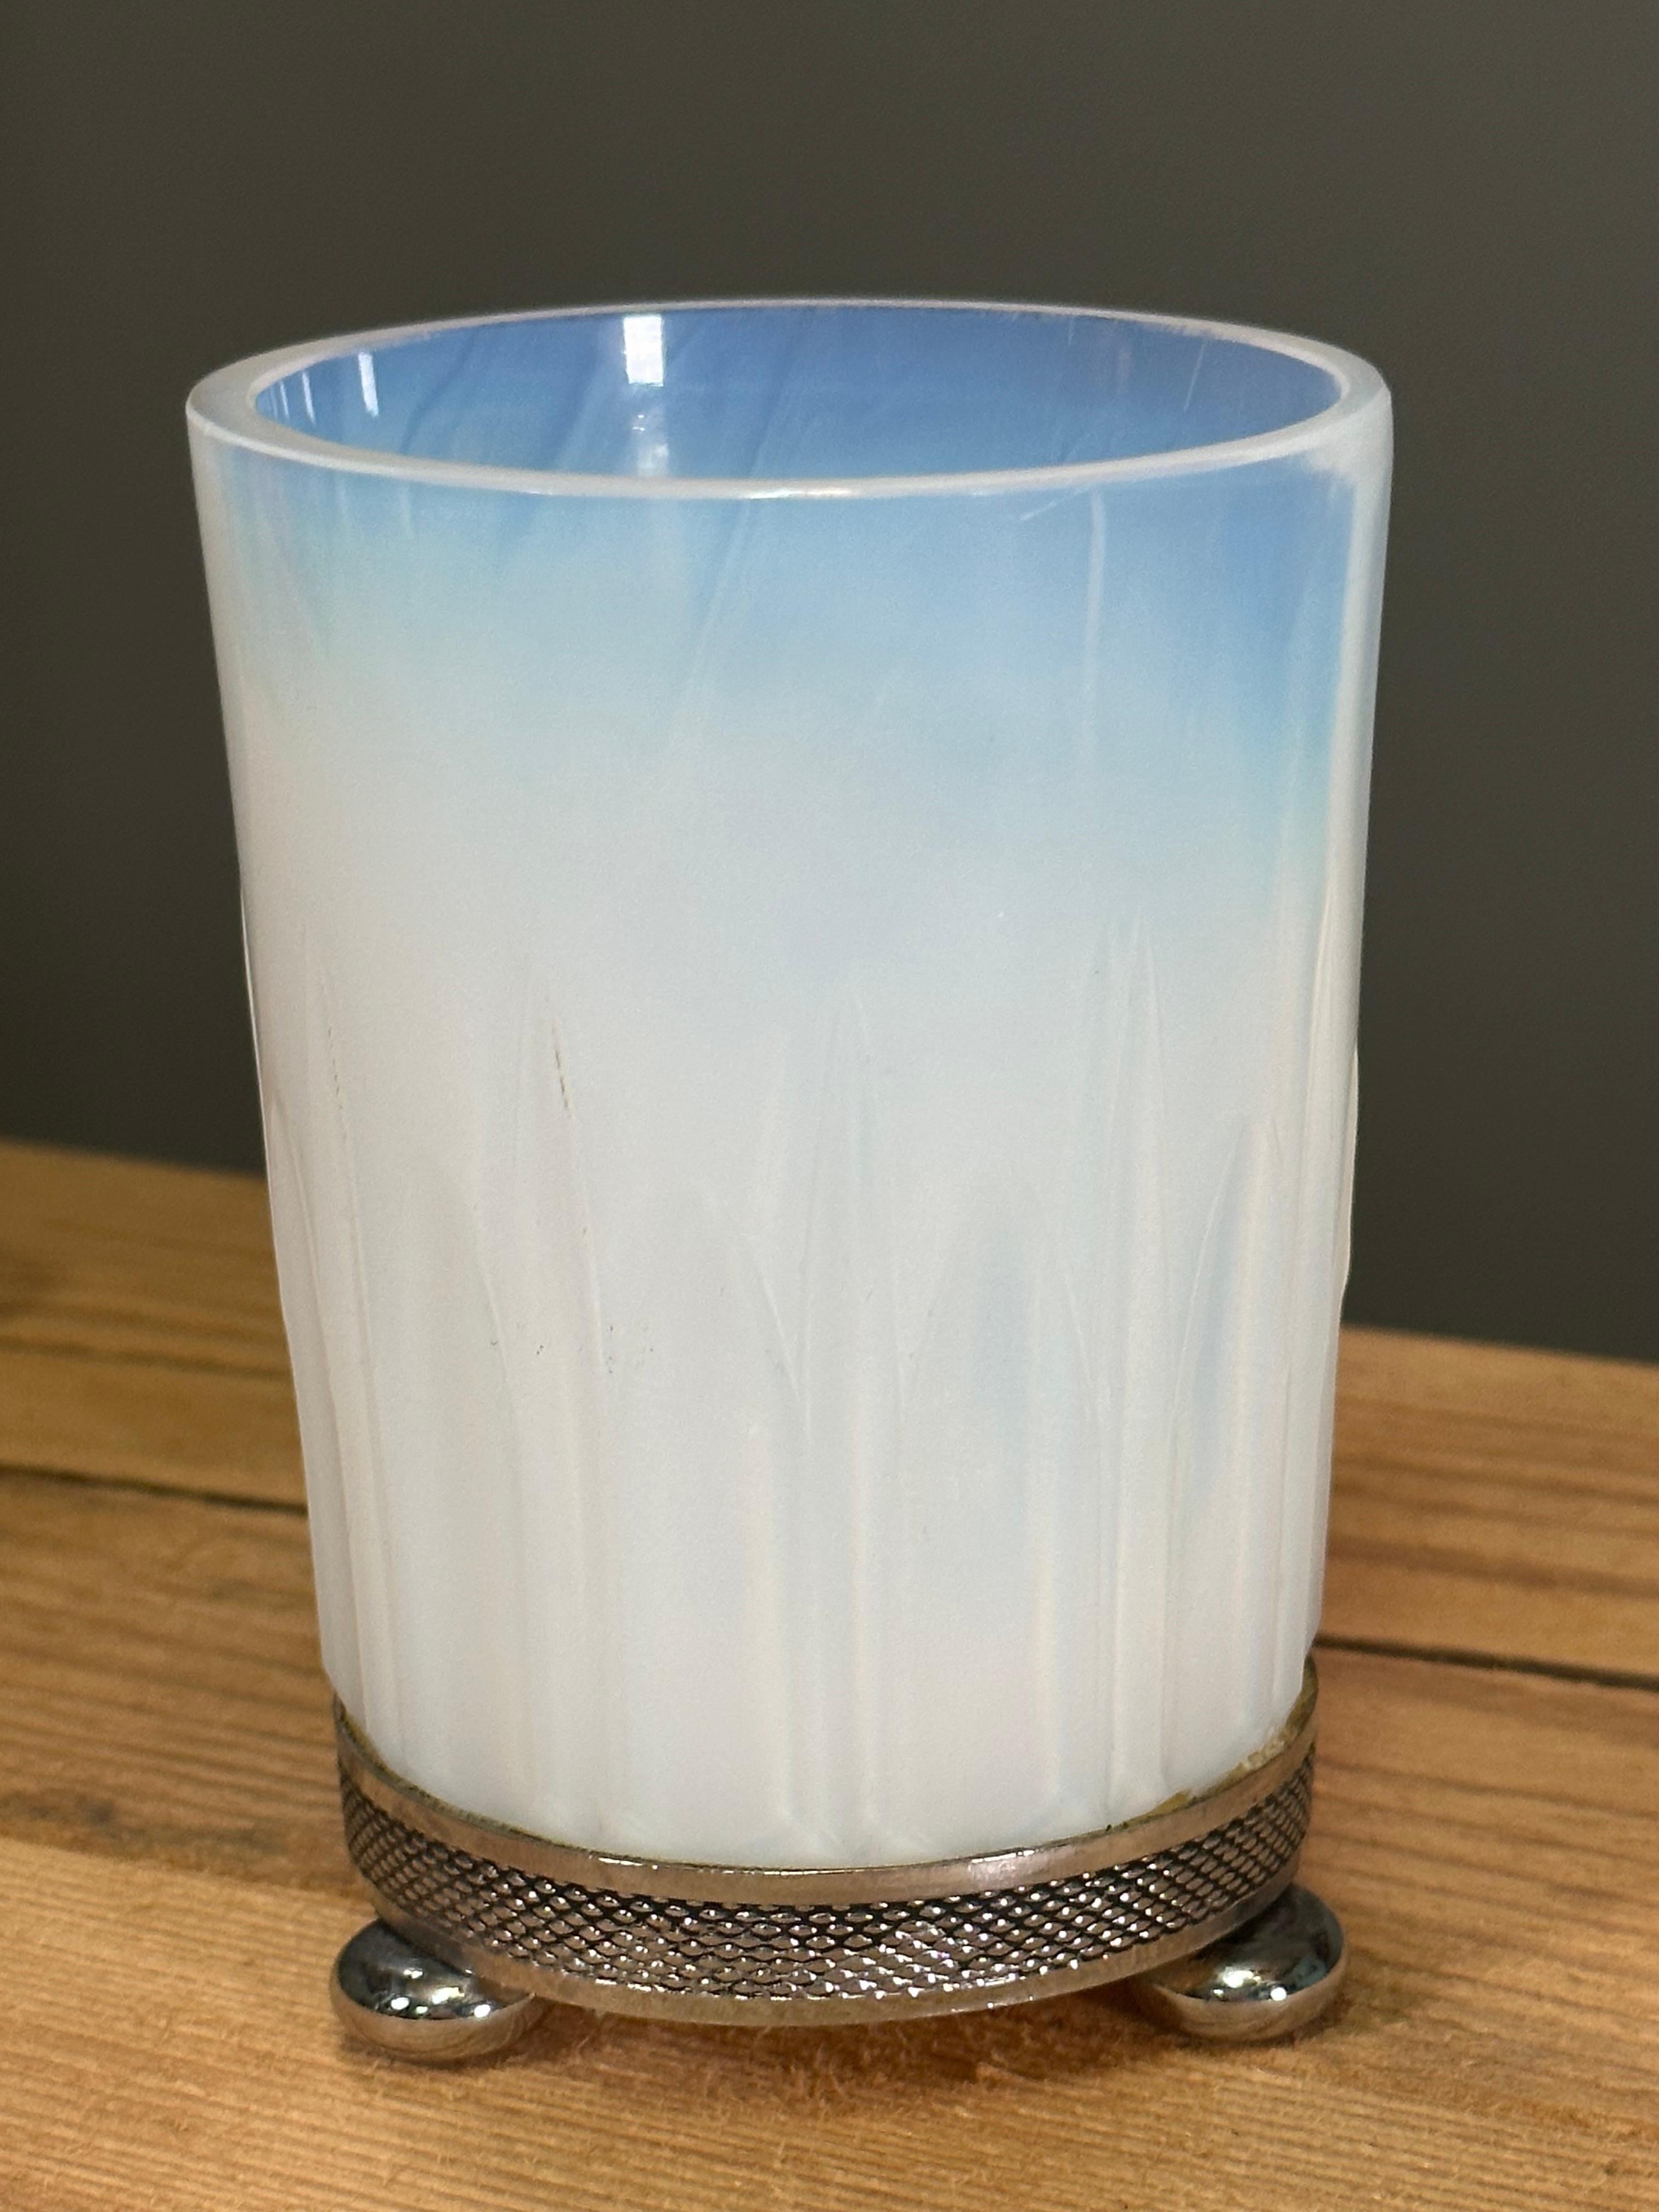 Mid-20th Century Art Deco Opalescent Glass and Silver Bowl, Vase style Lalique, Sabino. France For Sale